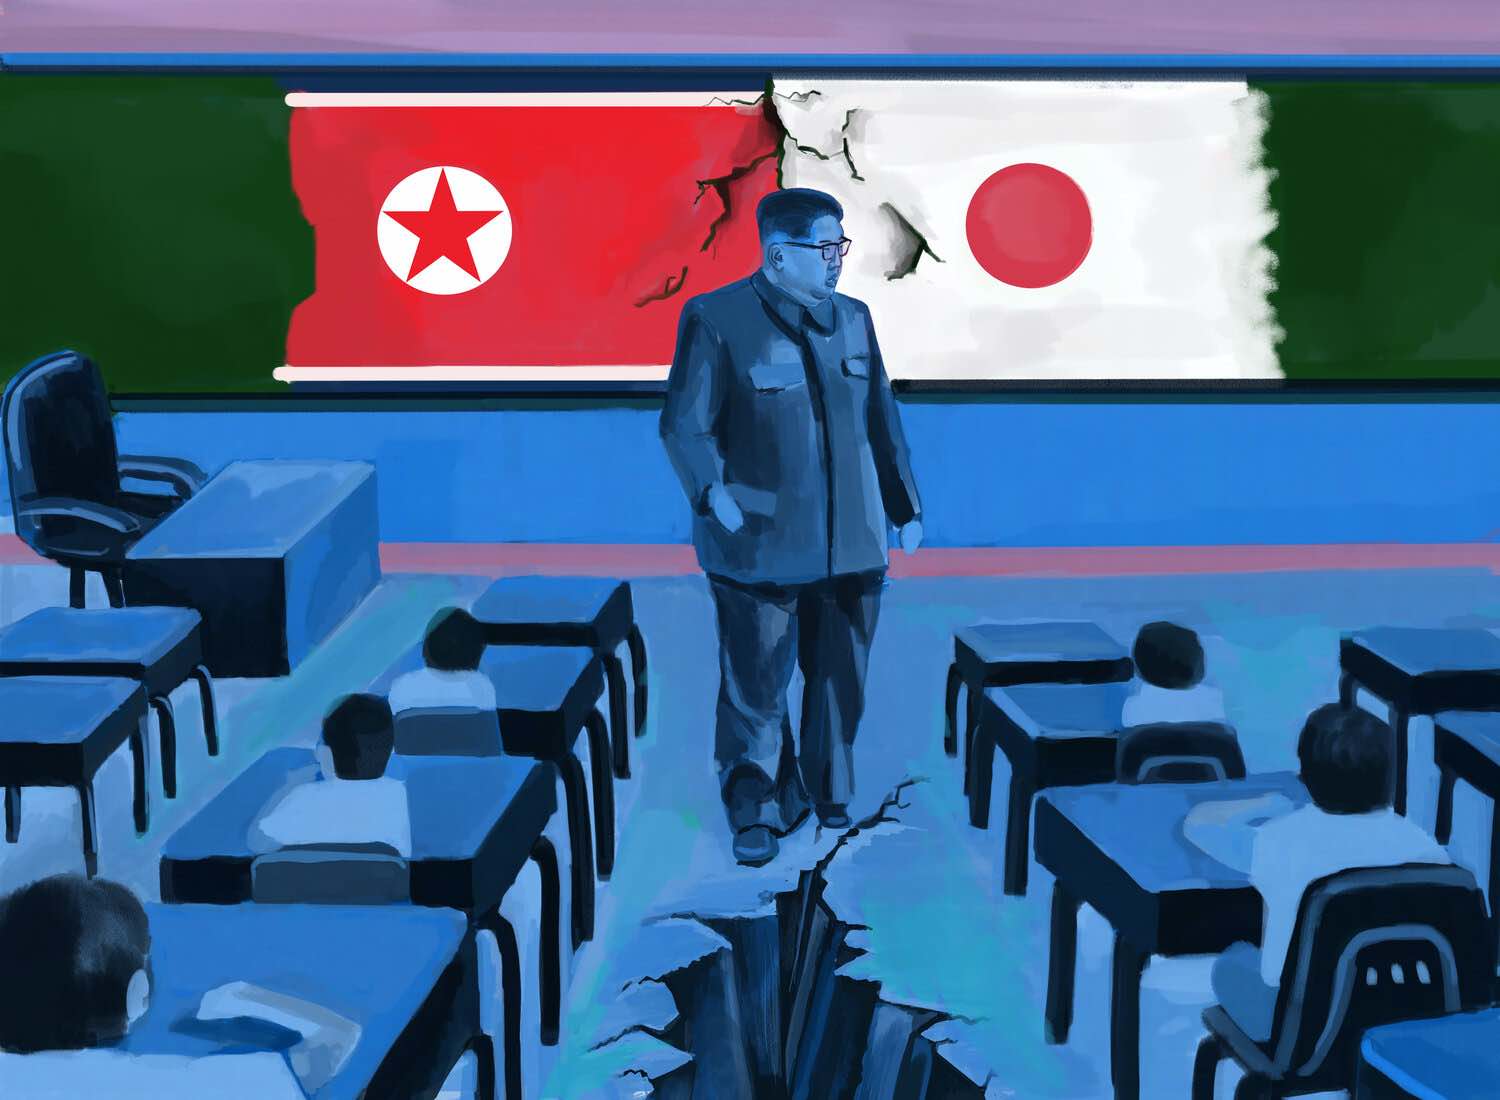 Painting of Kim Jong Un standing in front of a classroom with of the flags of North Korea and Japan behind him. A rift in the ground is opening beneath his feet.